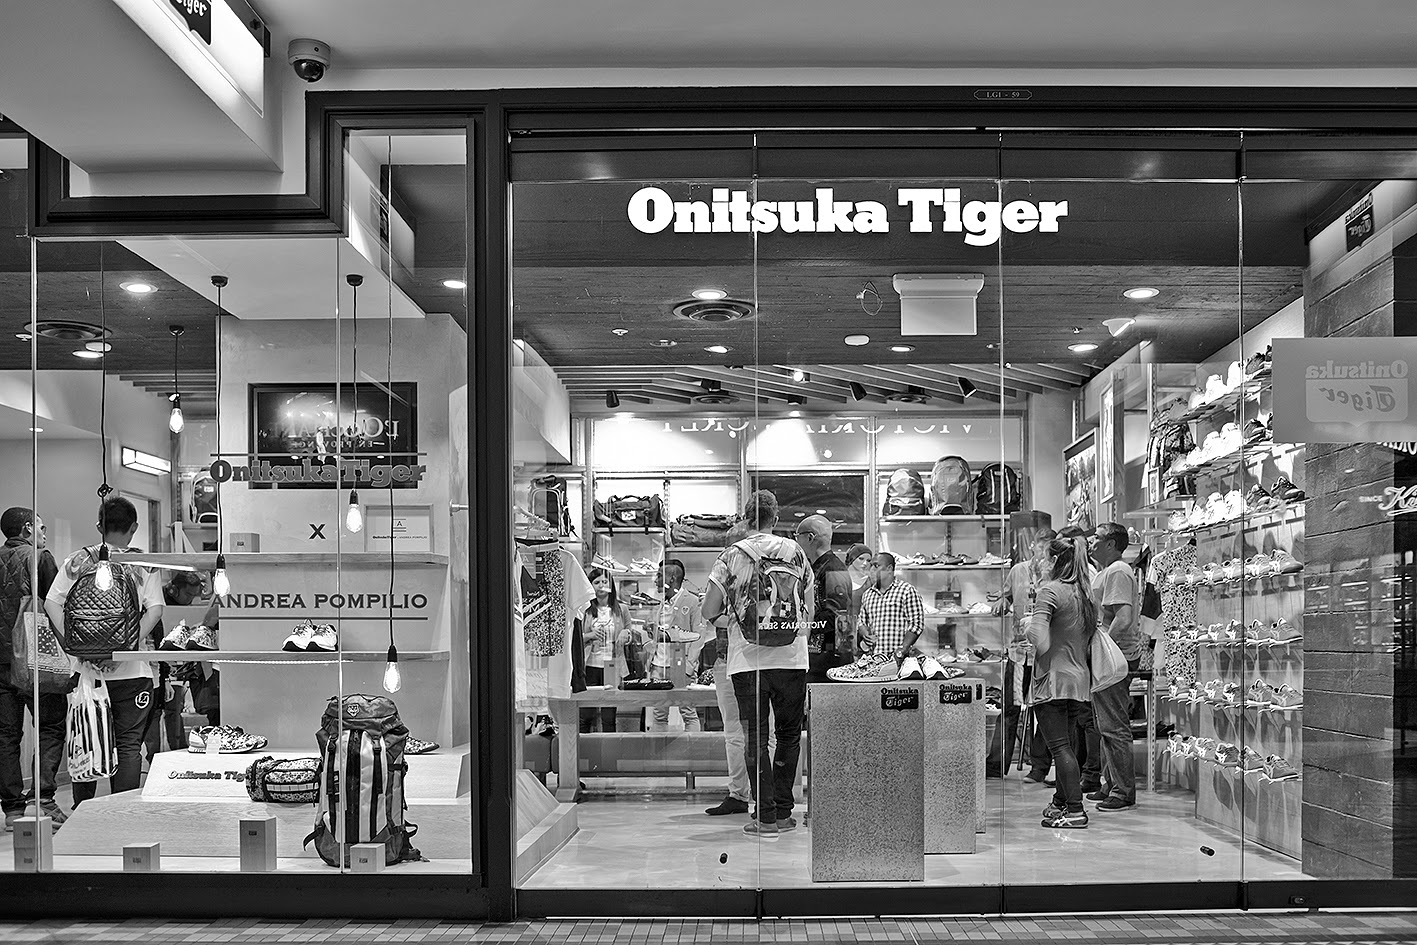 I Dig Your Sole Man: Onitsuka Tiger x Andrea Pompilio Launch; Sydney